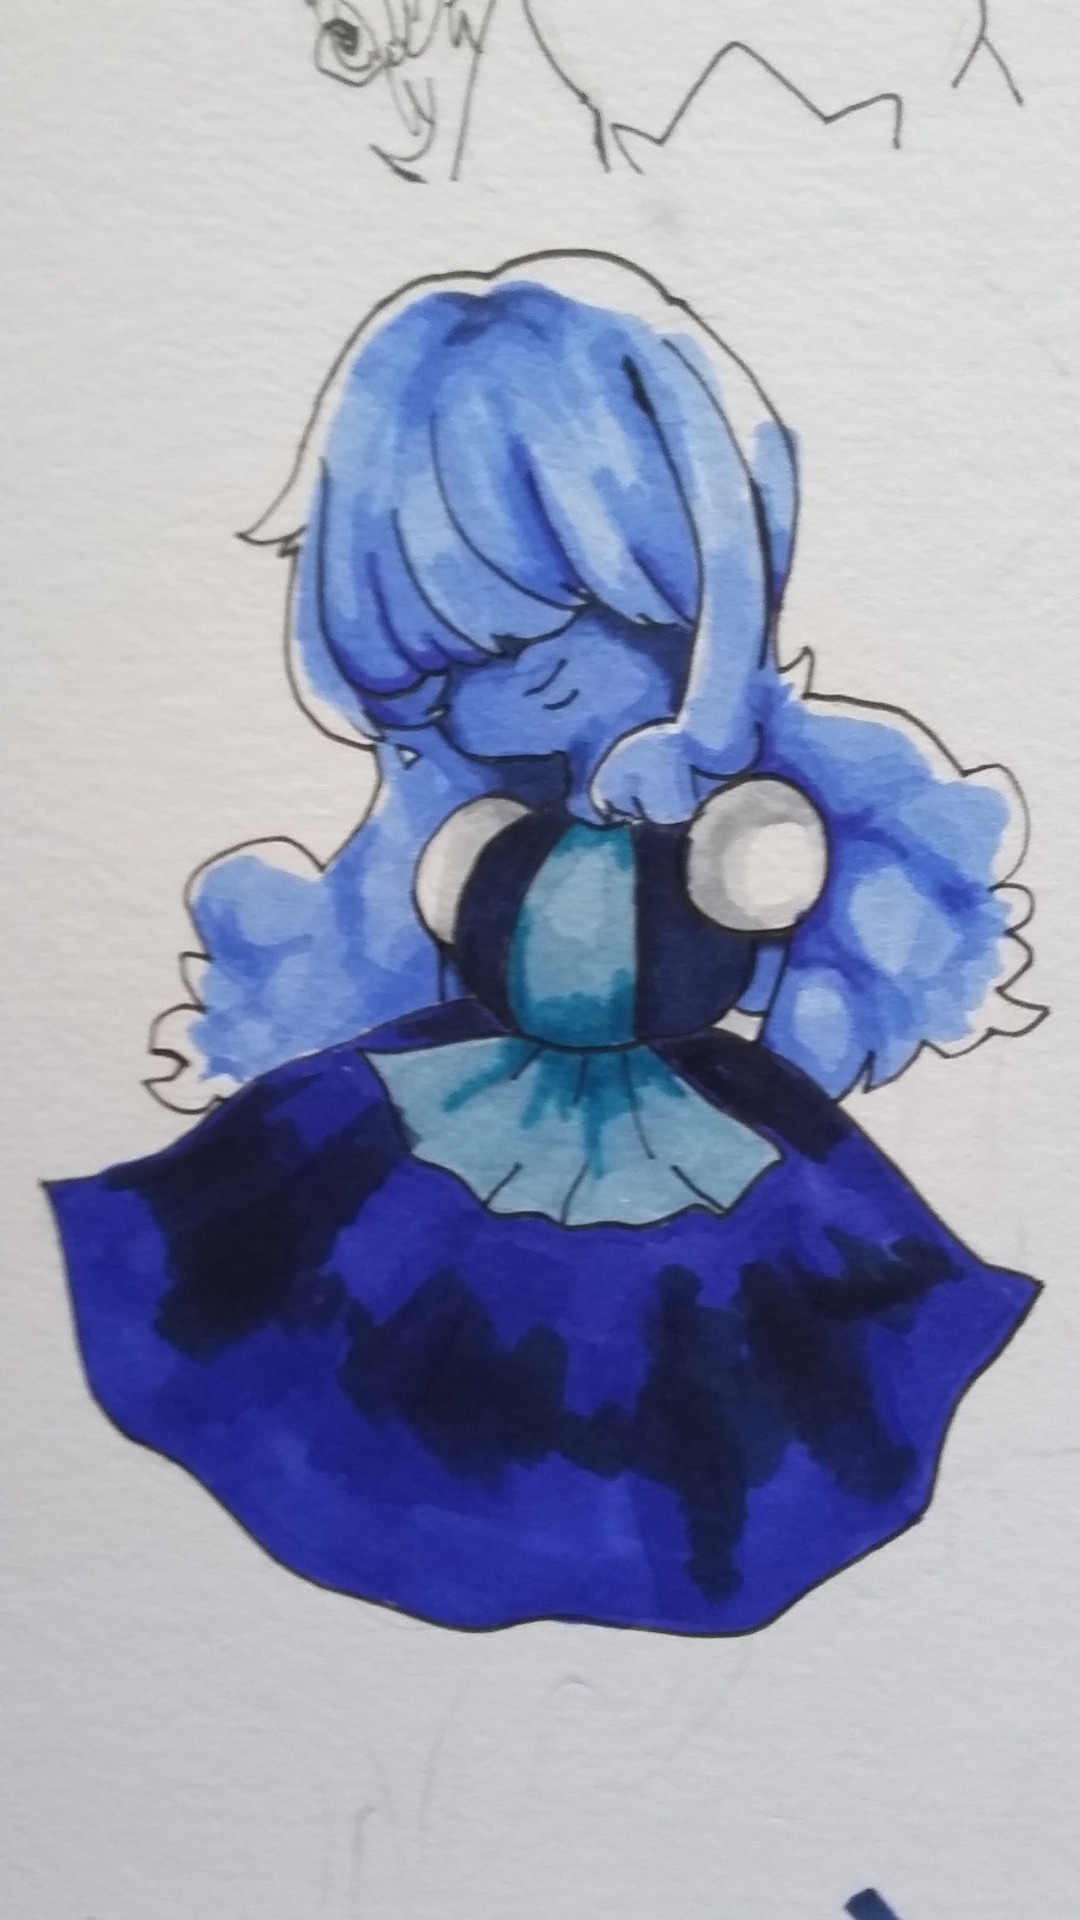 Tried drawing and colorin’ a Sapphire